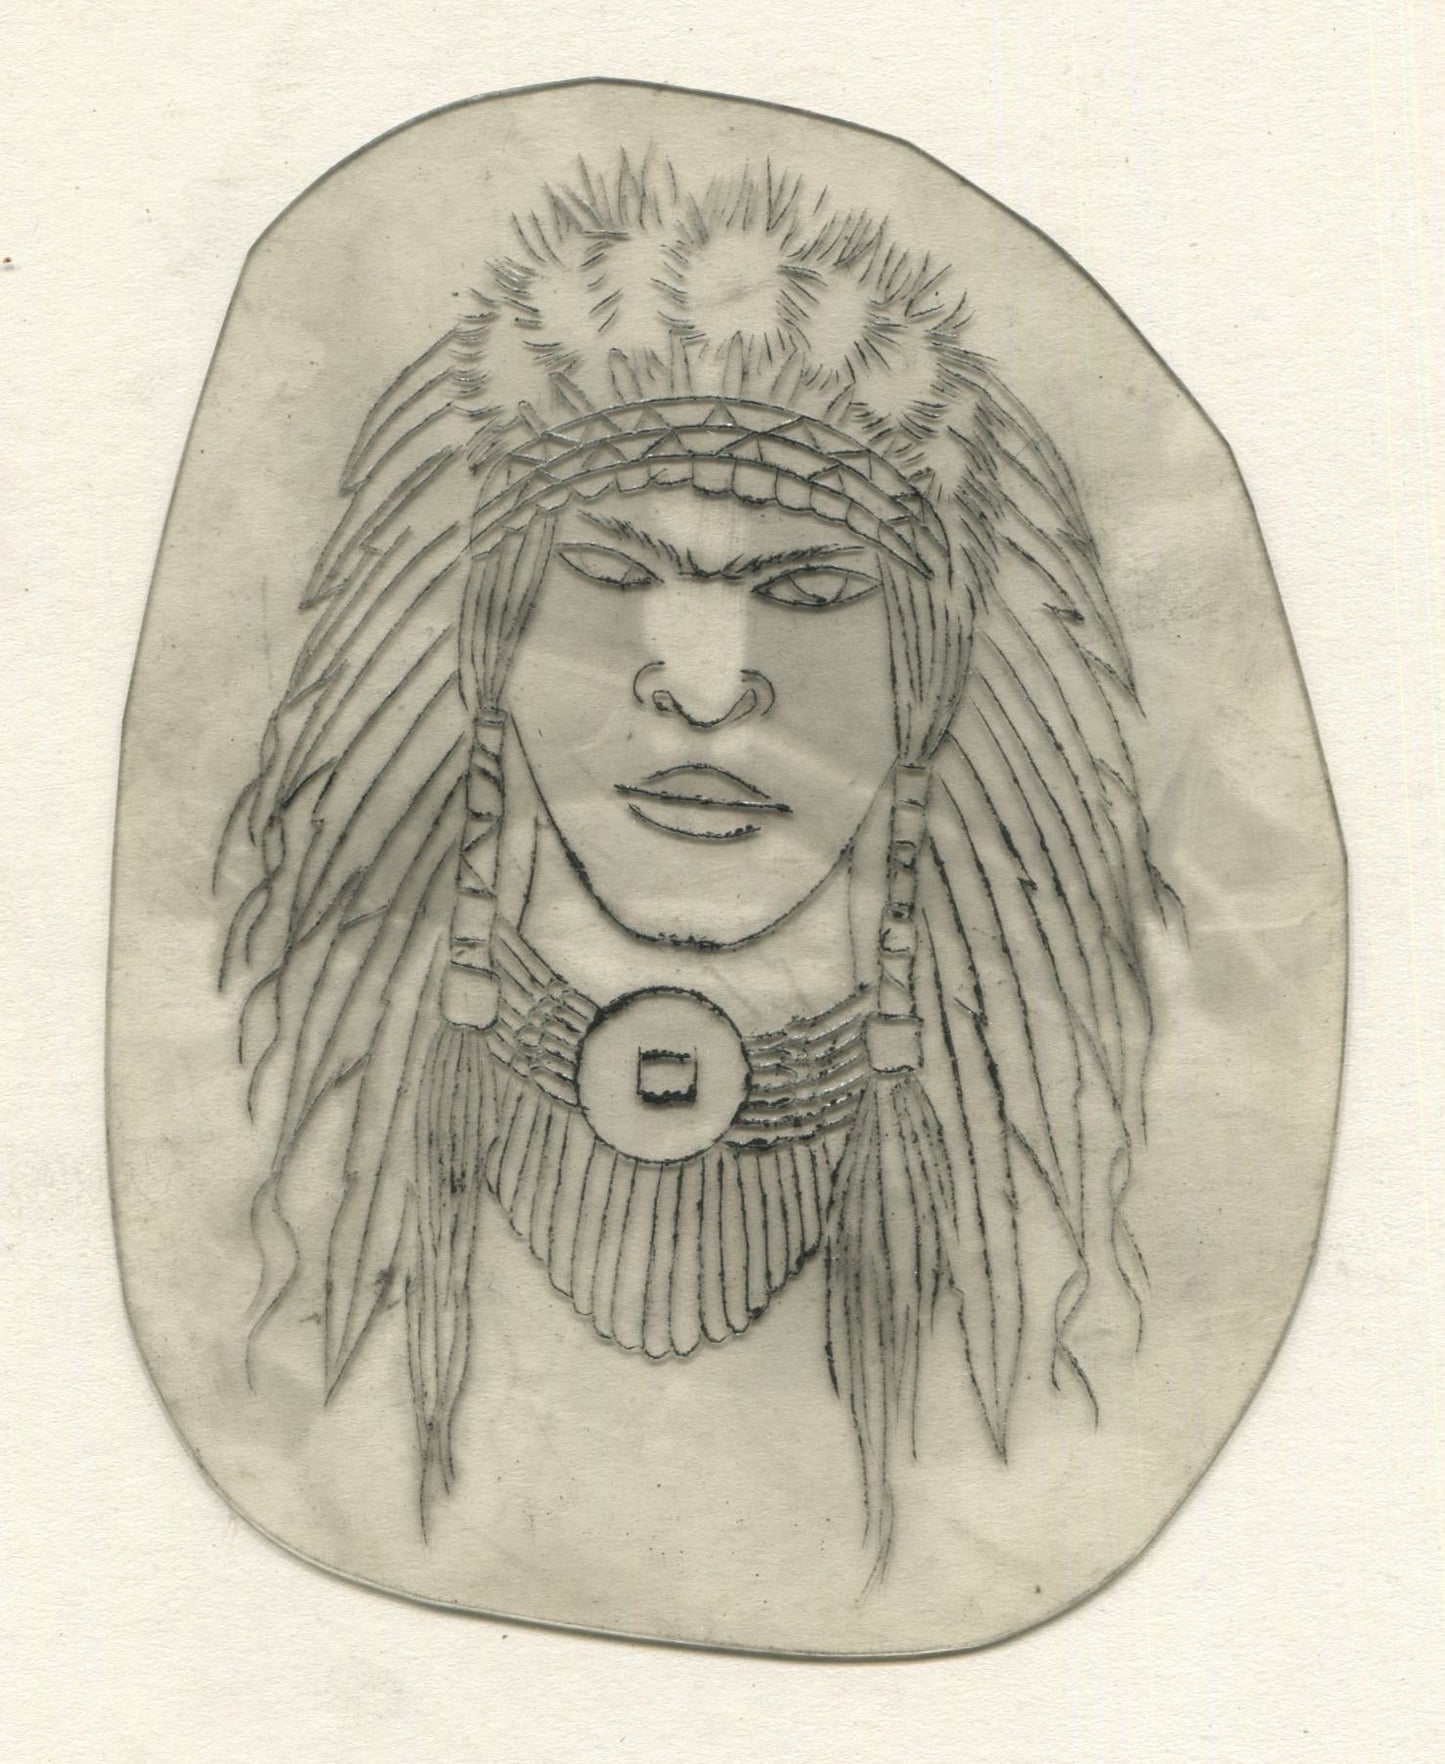 Native Man Vintage Traditional Tattoo Acetate Stencil from Bert Grimm's Shop